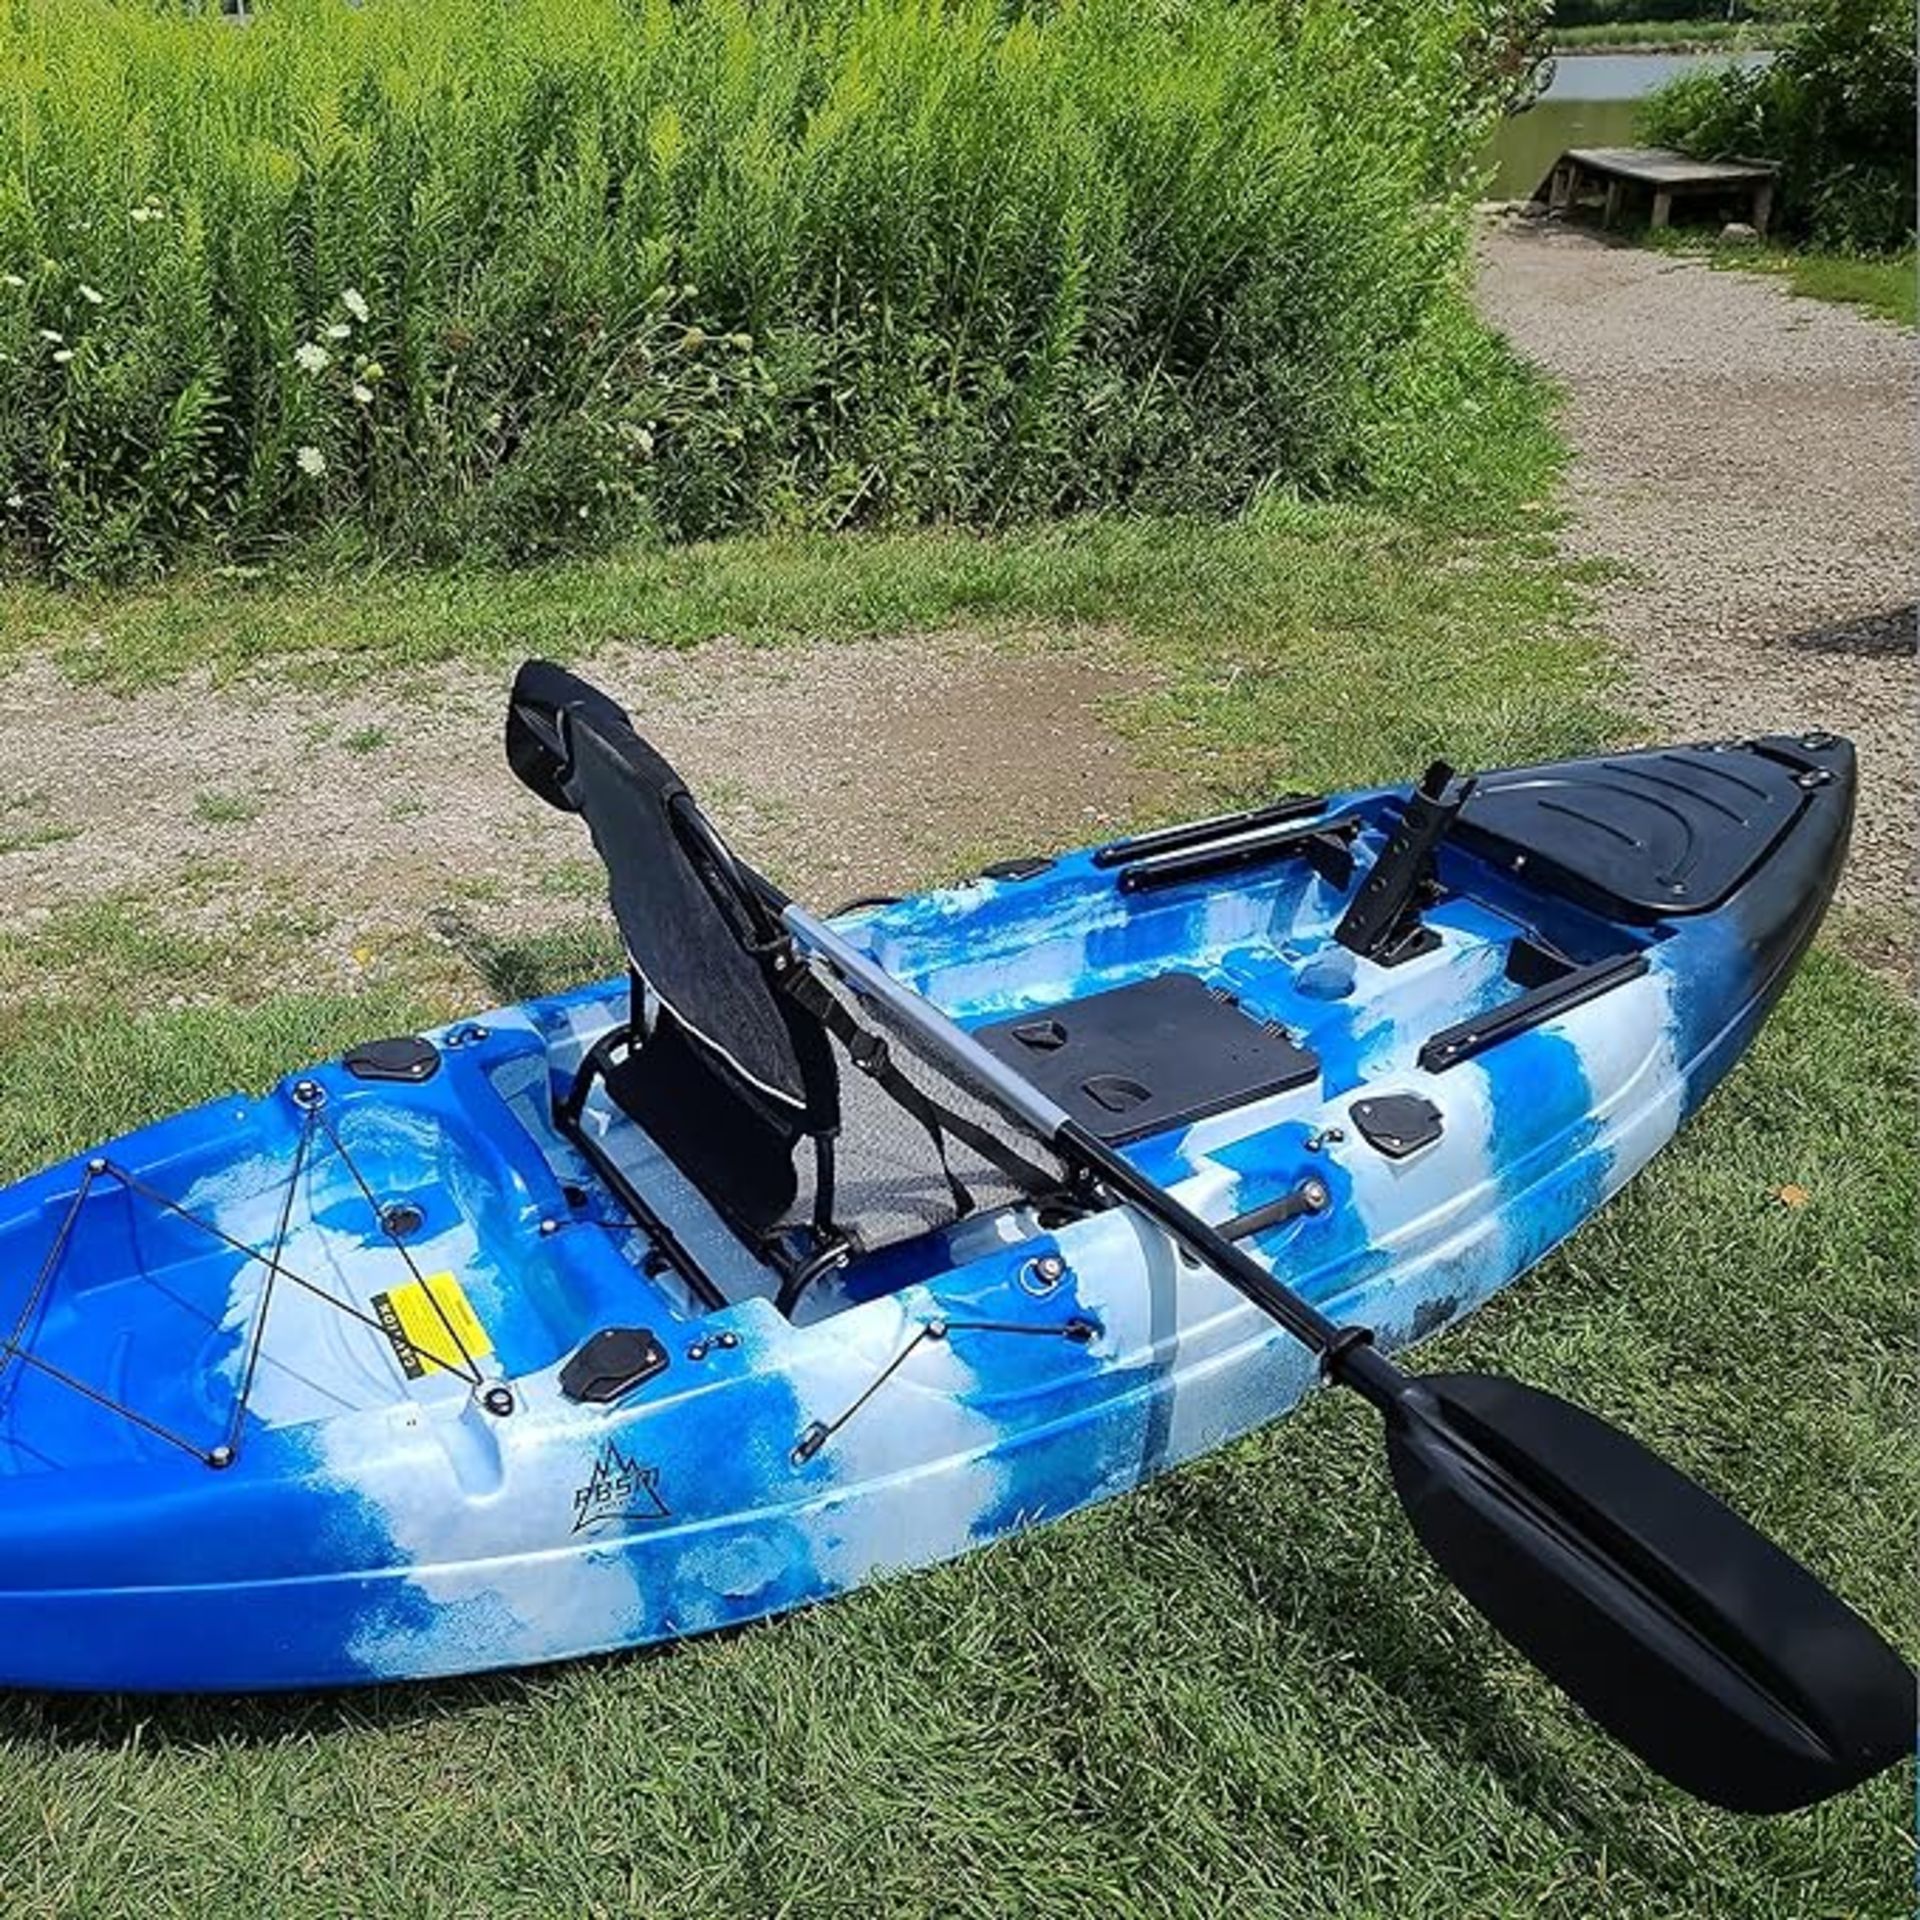 SEA OTTER 1-PERSON RECREATIONAL / FISHING KAYAK (NEW) (MSRP $1,800) - Image 2 of 4